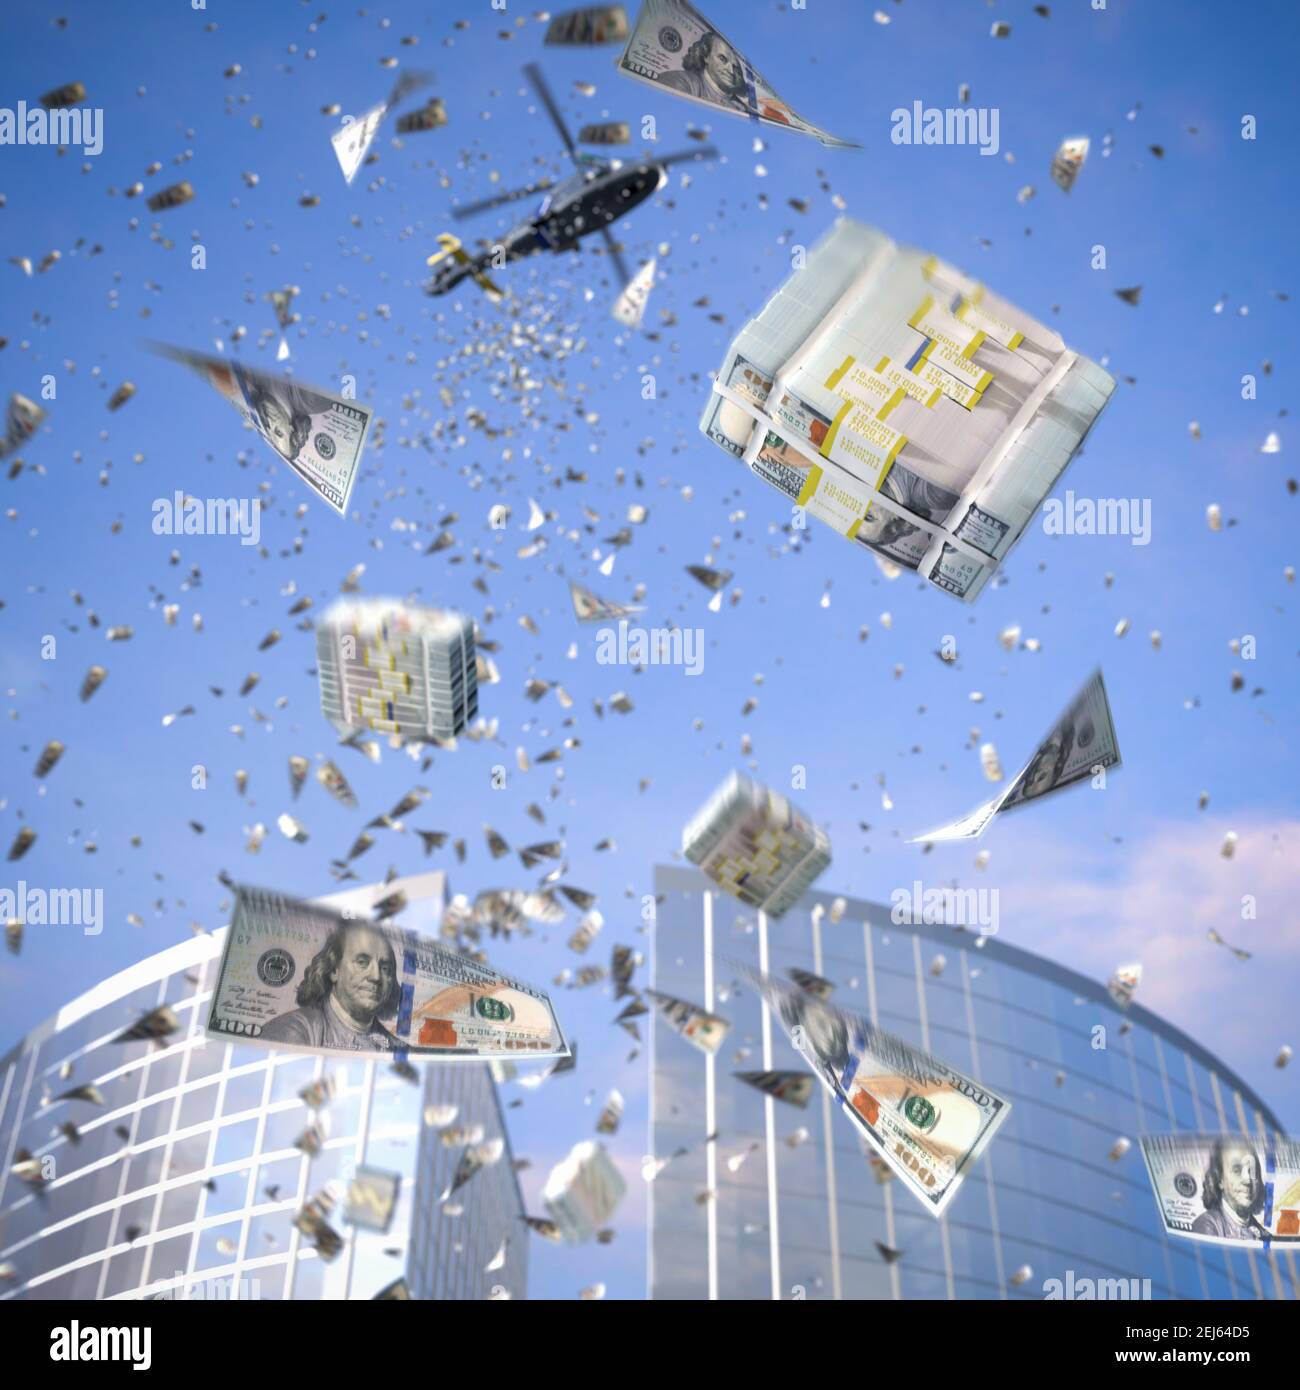 Helicopter money: A helicopter throwing stacks of dollars and singel 100 USD bank notes. Helicopter money is a synonym for boosting consumer spending Stock Photo